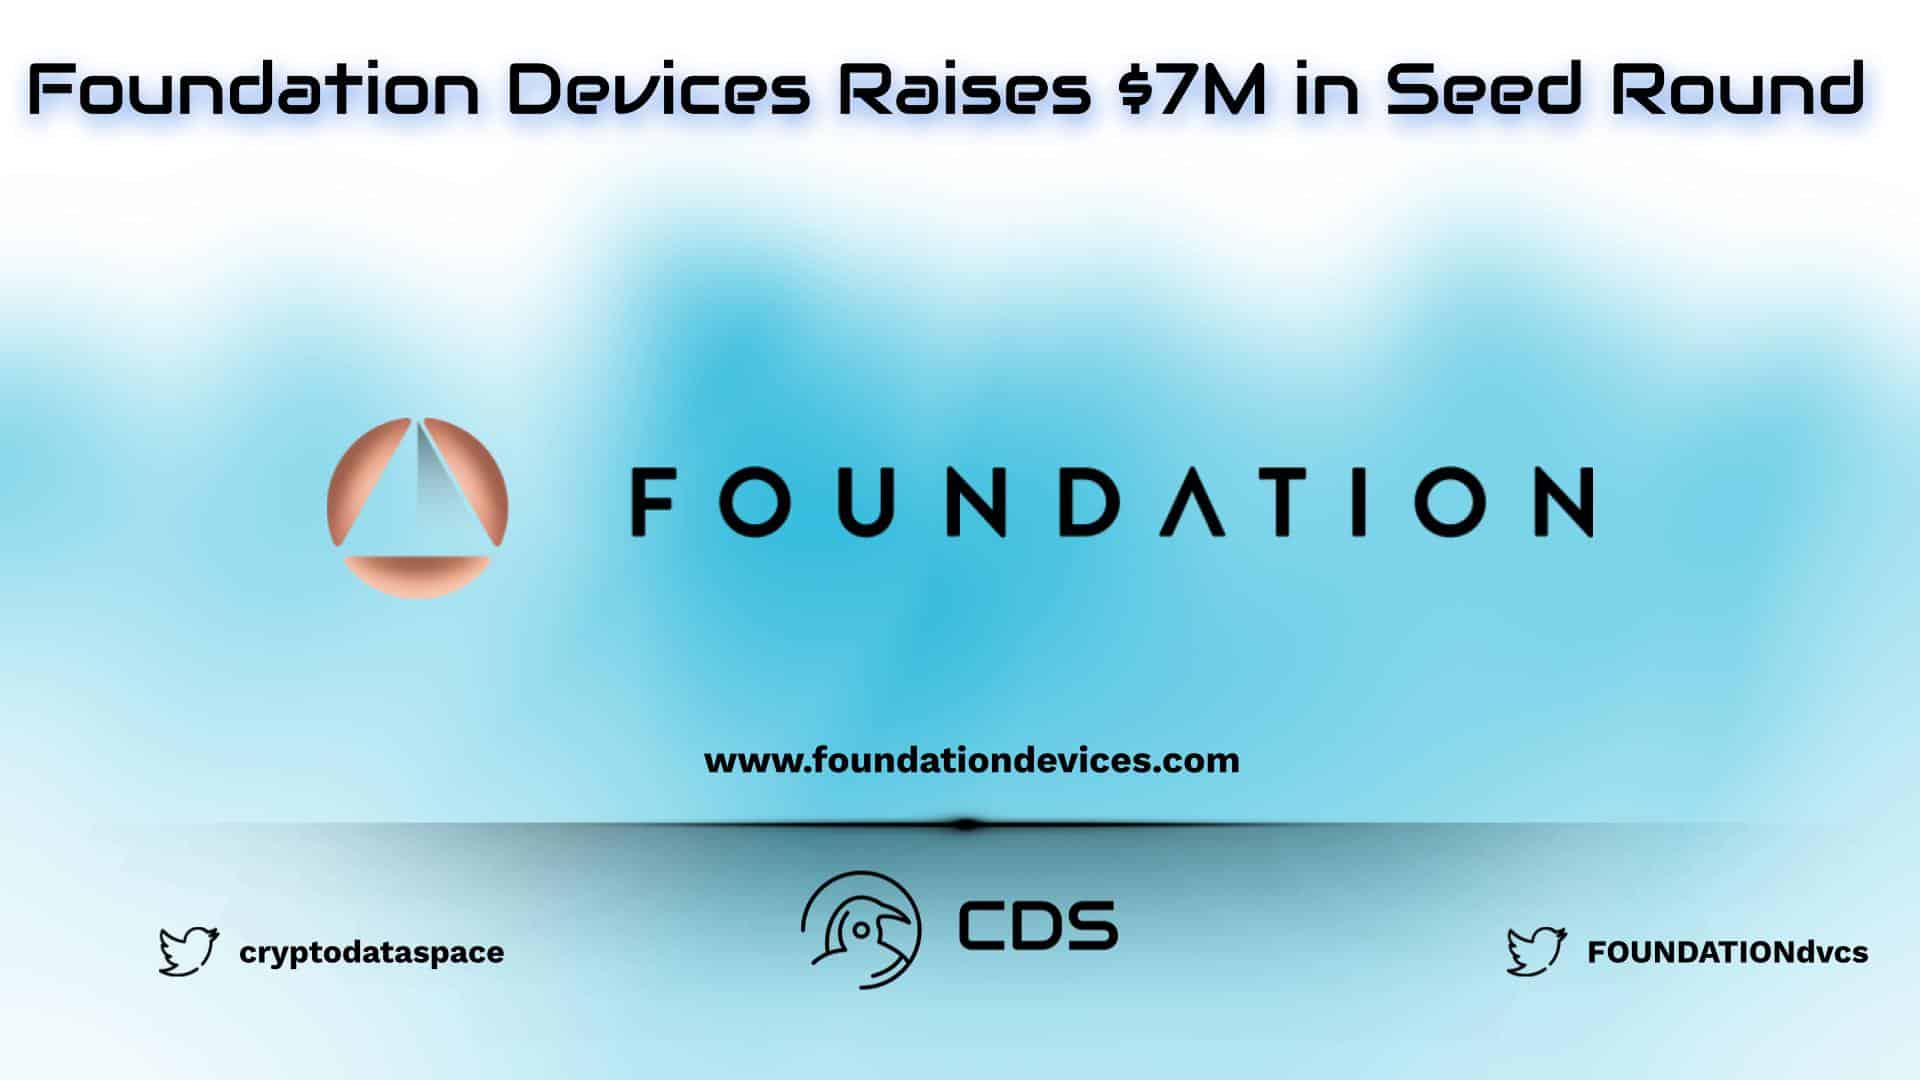 Foundation Devices Raises $7M in Seed Round